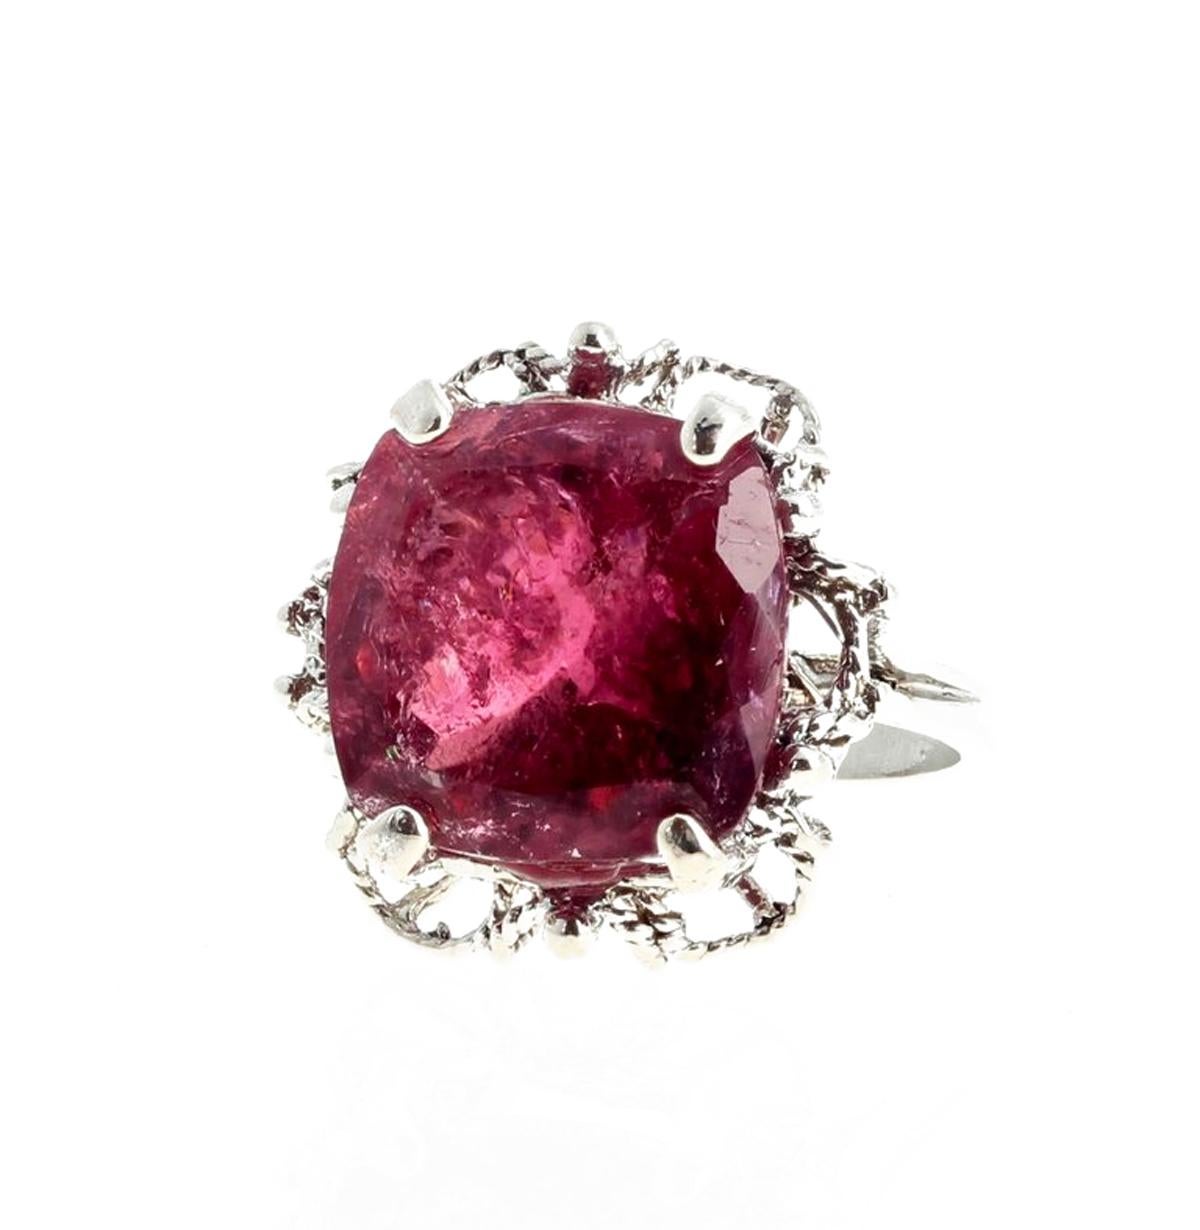 9.71 carats of deep red cushion cut Rubelite Tourmaline (13.4mm x 13.4mm) set in a decorative unique handmade sterling silver ring size 5.5 (sizable).  Spectacular optical effect of the inclusions in the Tourmaline exhibits brilliant reflections and